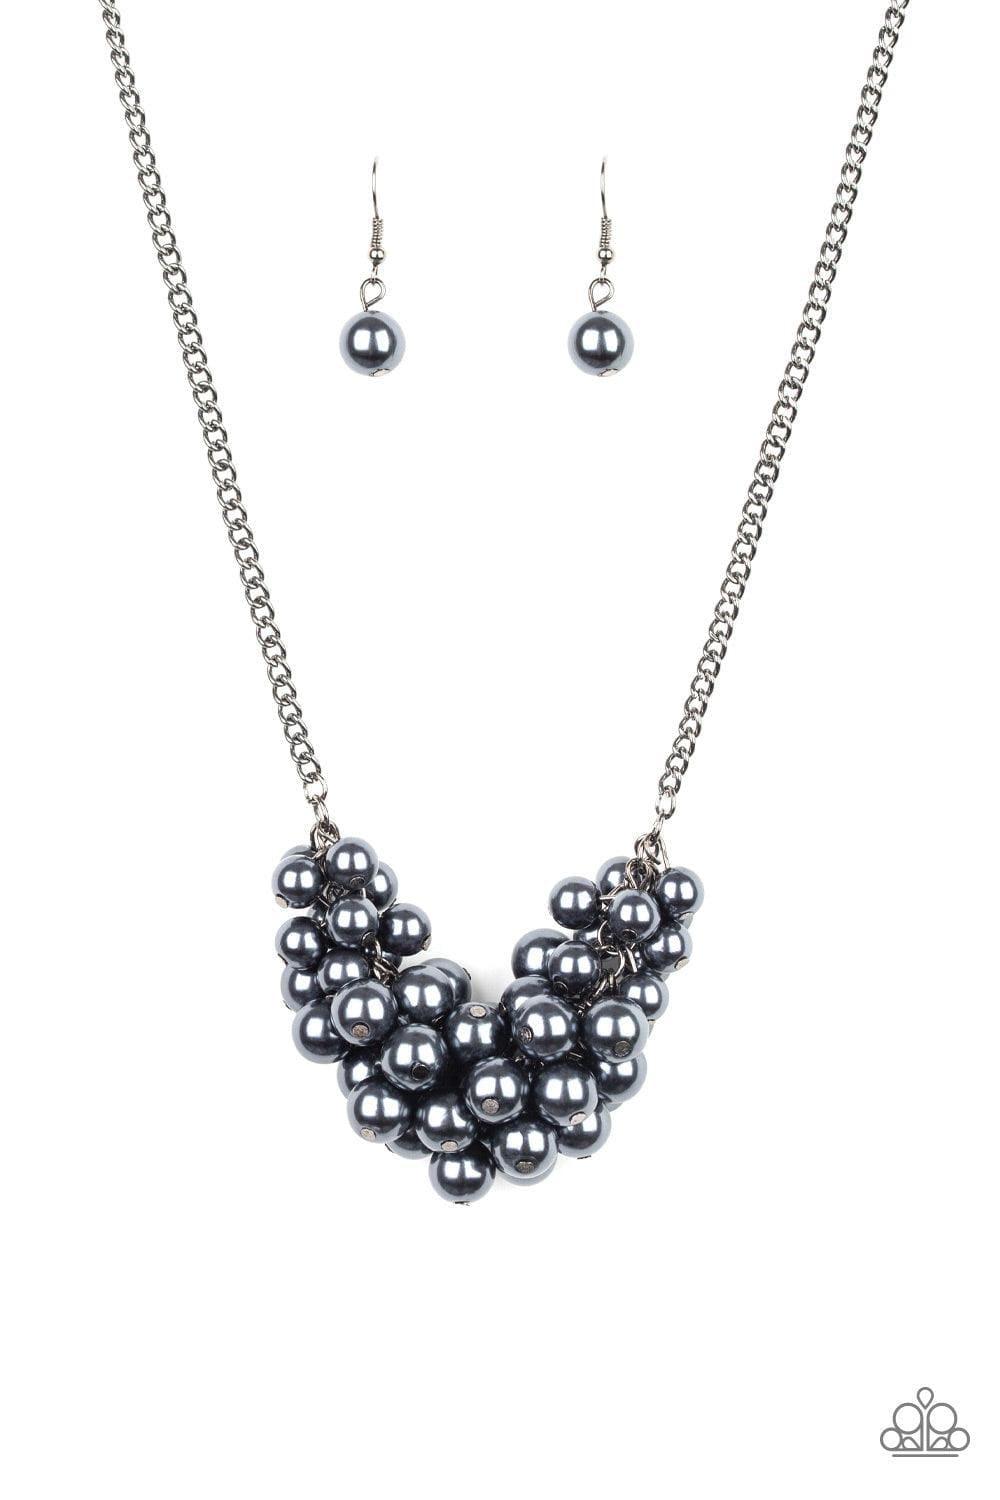 Paparazzi Accessories - Grandiose Glimmer - Black Necklace - Bling by JessieK